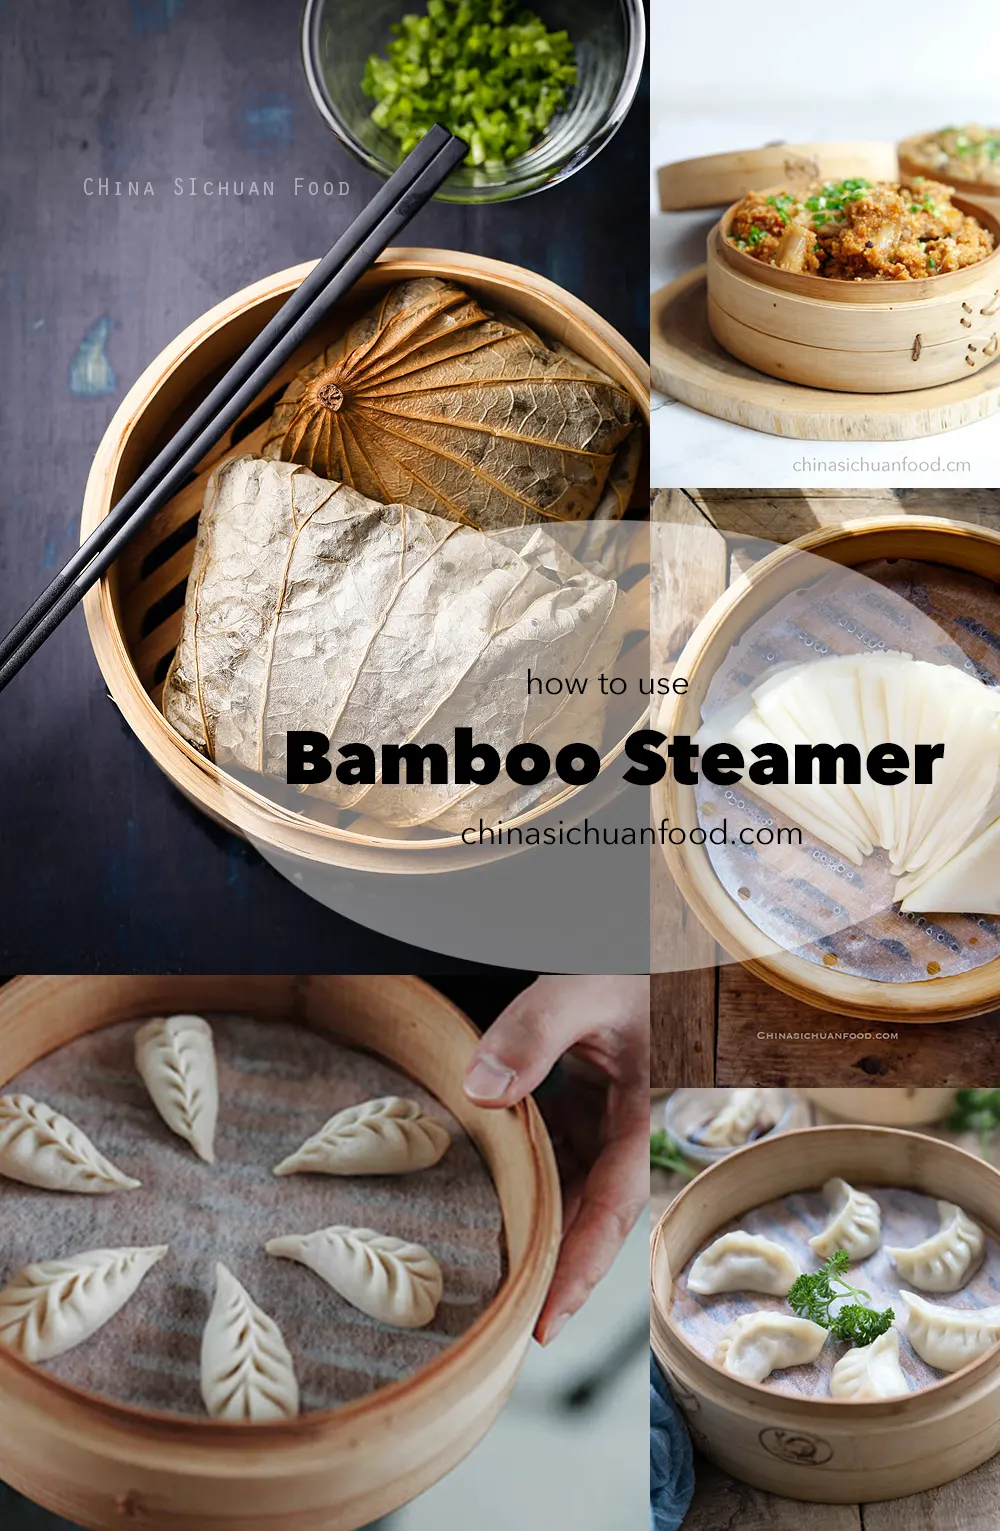 https://www.chinasichuanfood.com/wp-content/uploads/2022/12/how-to-use-bamboo-steamer.webp